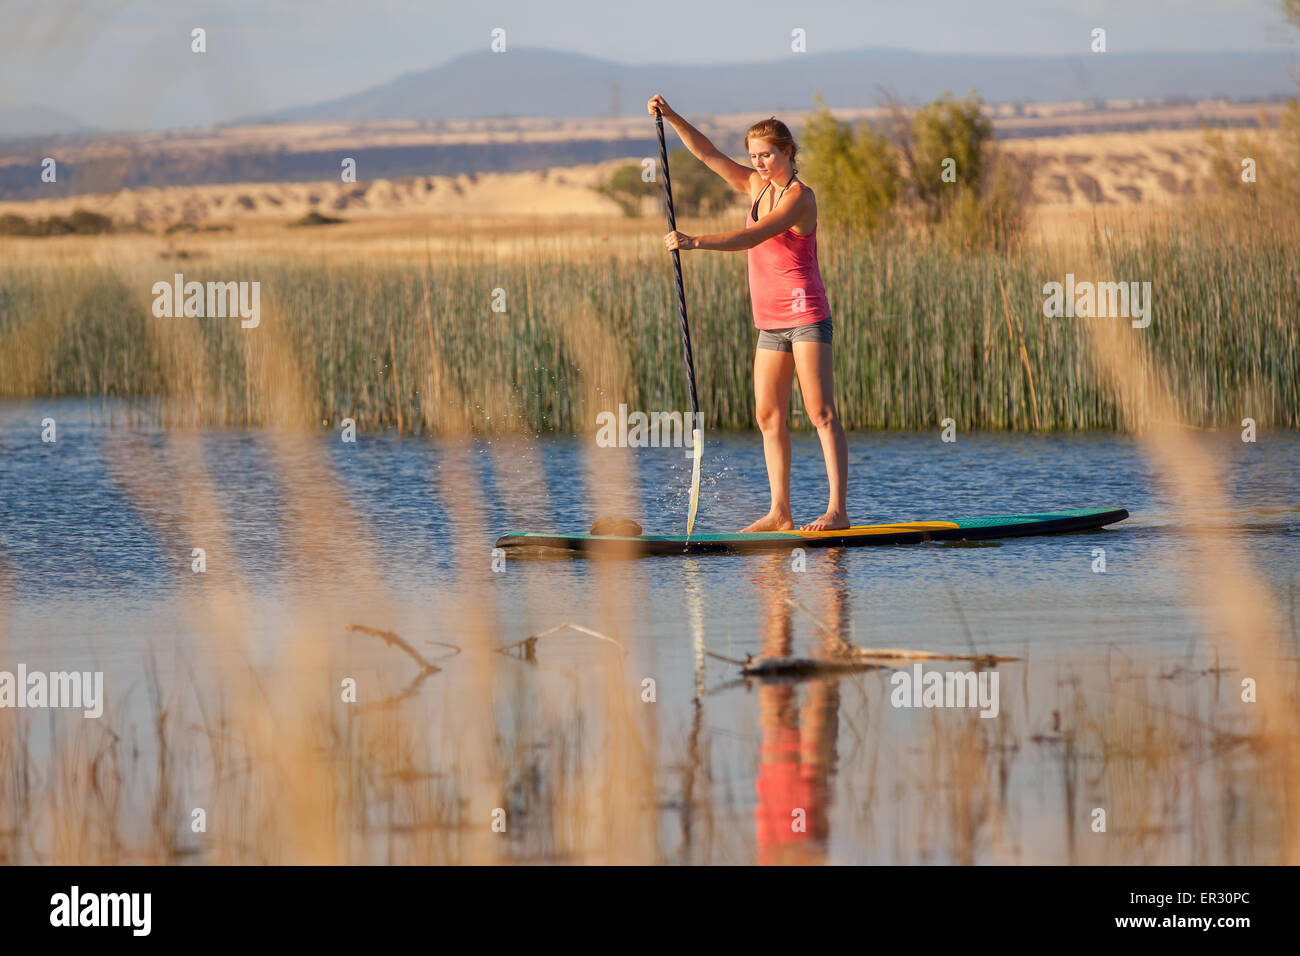 A young woman on a Paddle board on a small lake in Northern California. Stock Photo